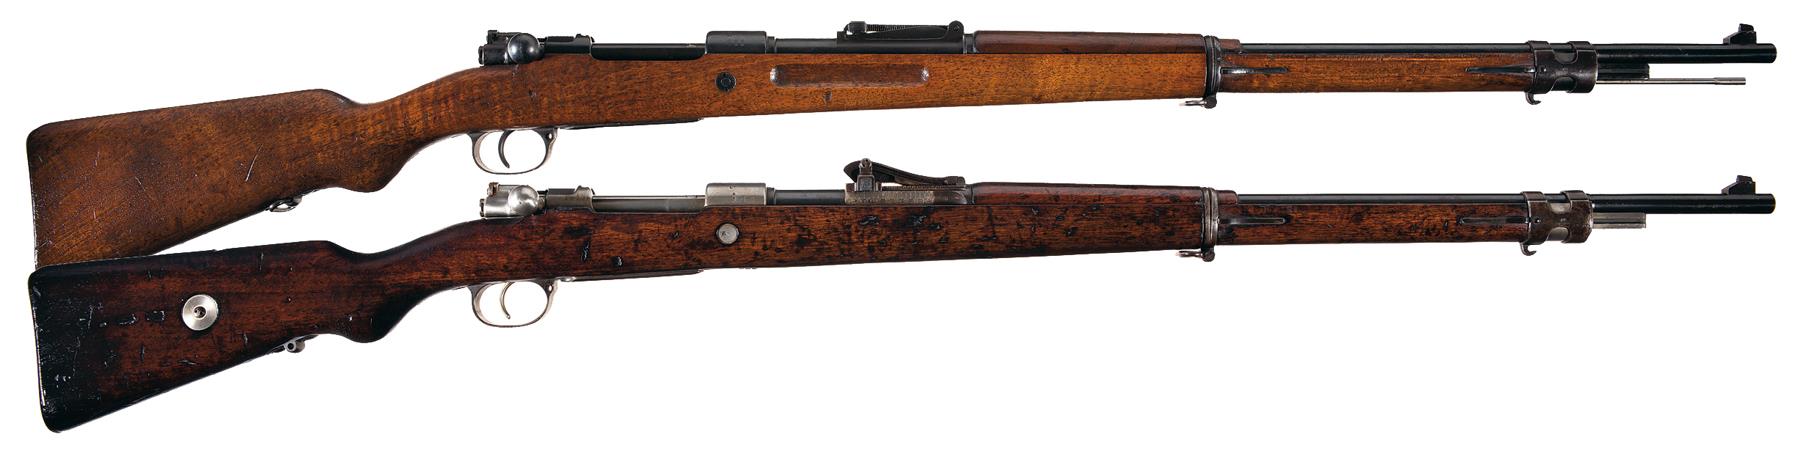 Collector's Lot of Two WWI German GEW 98 Bolt Action Rifles -A)